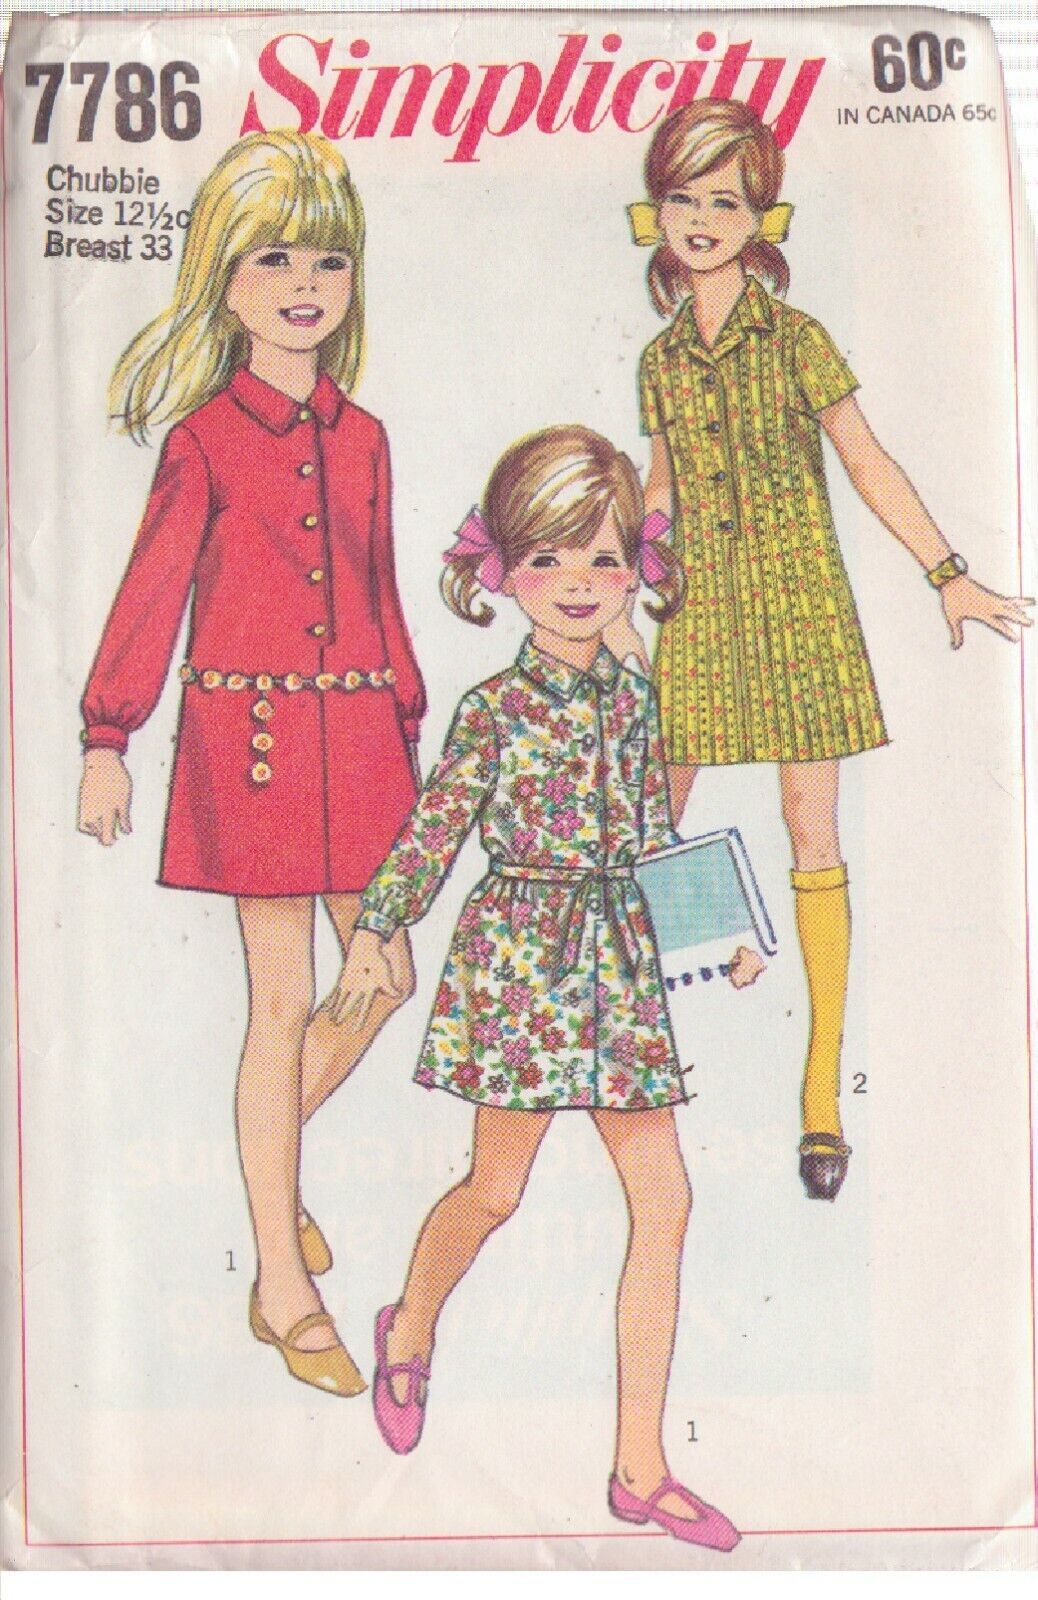 Primary image for SIMPLICITY PATTERN 7786 GIRLS' SHIRT DRESS IN 2 VARIATIONS SIZE 12 1/2 UNCUT